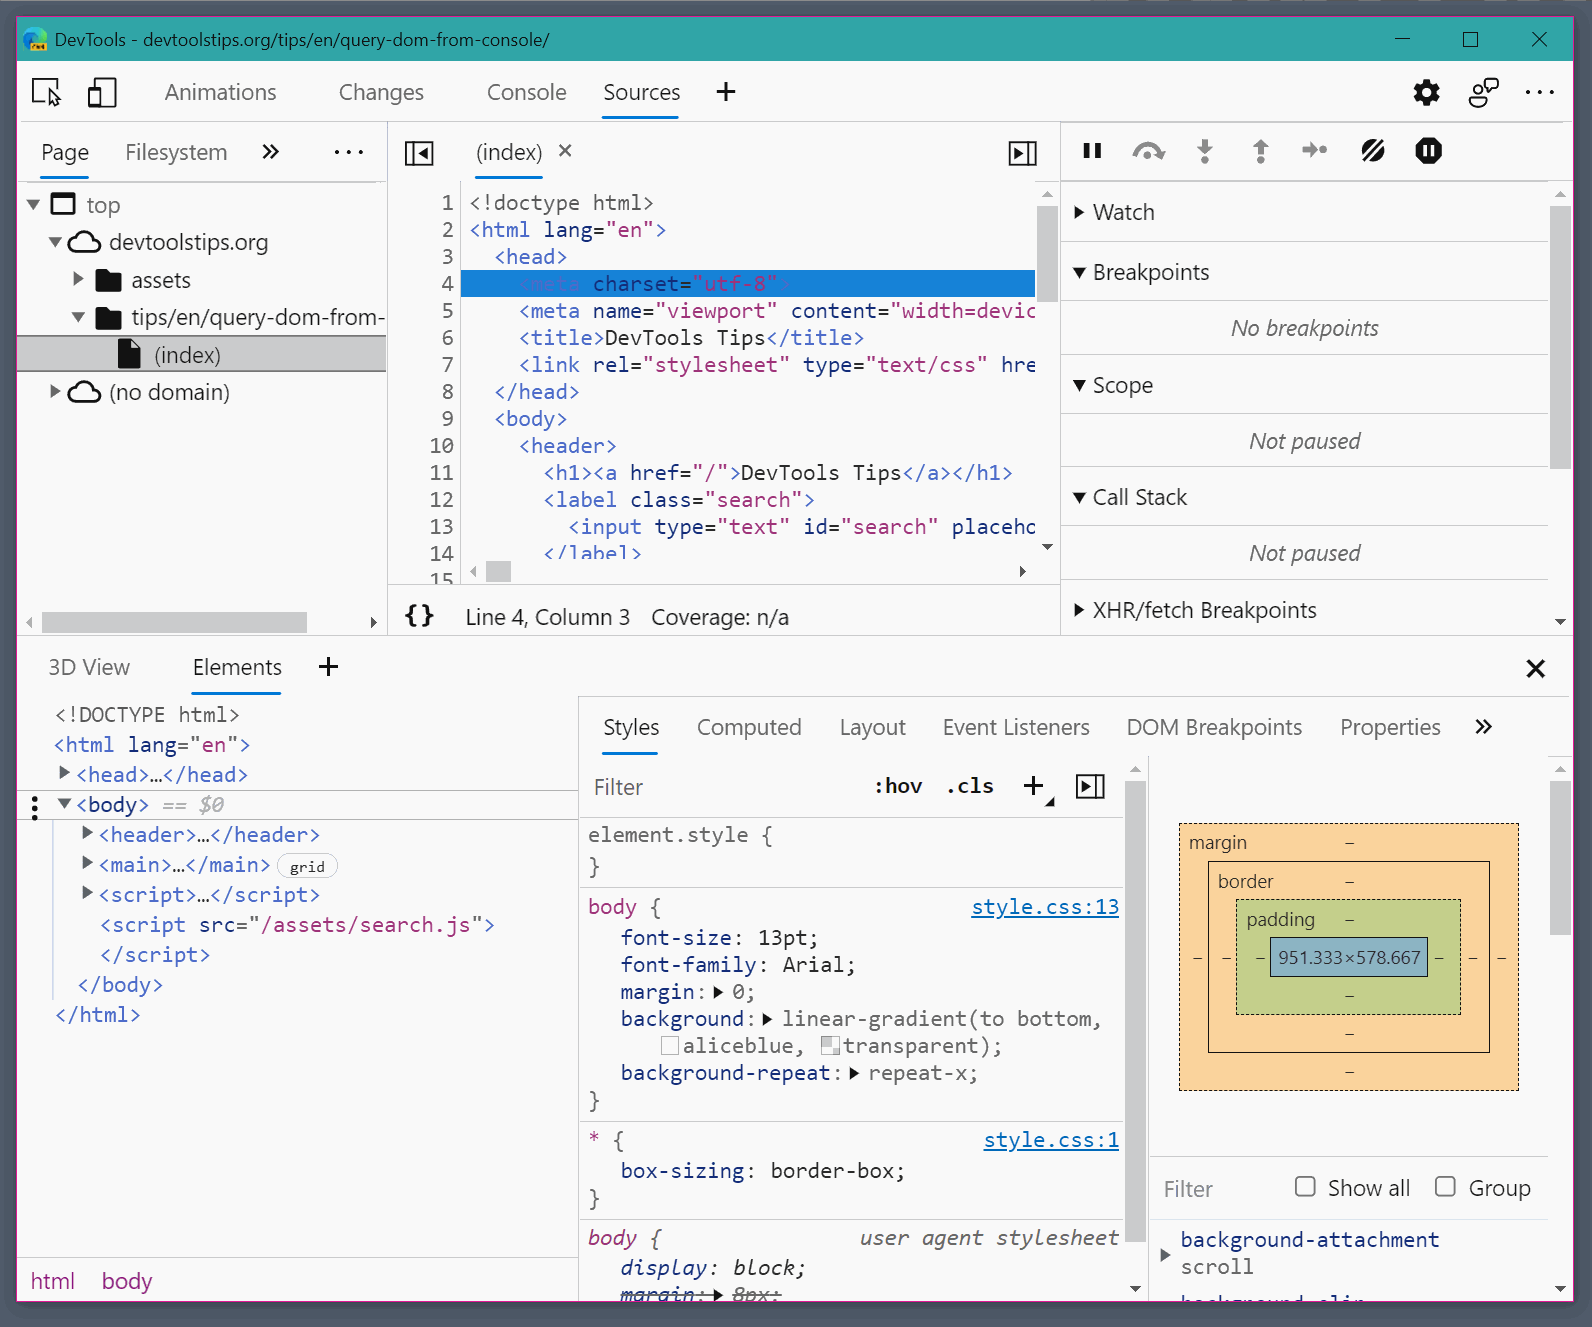 gif animation of the devtools tooltips in edge